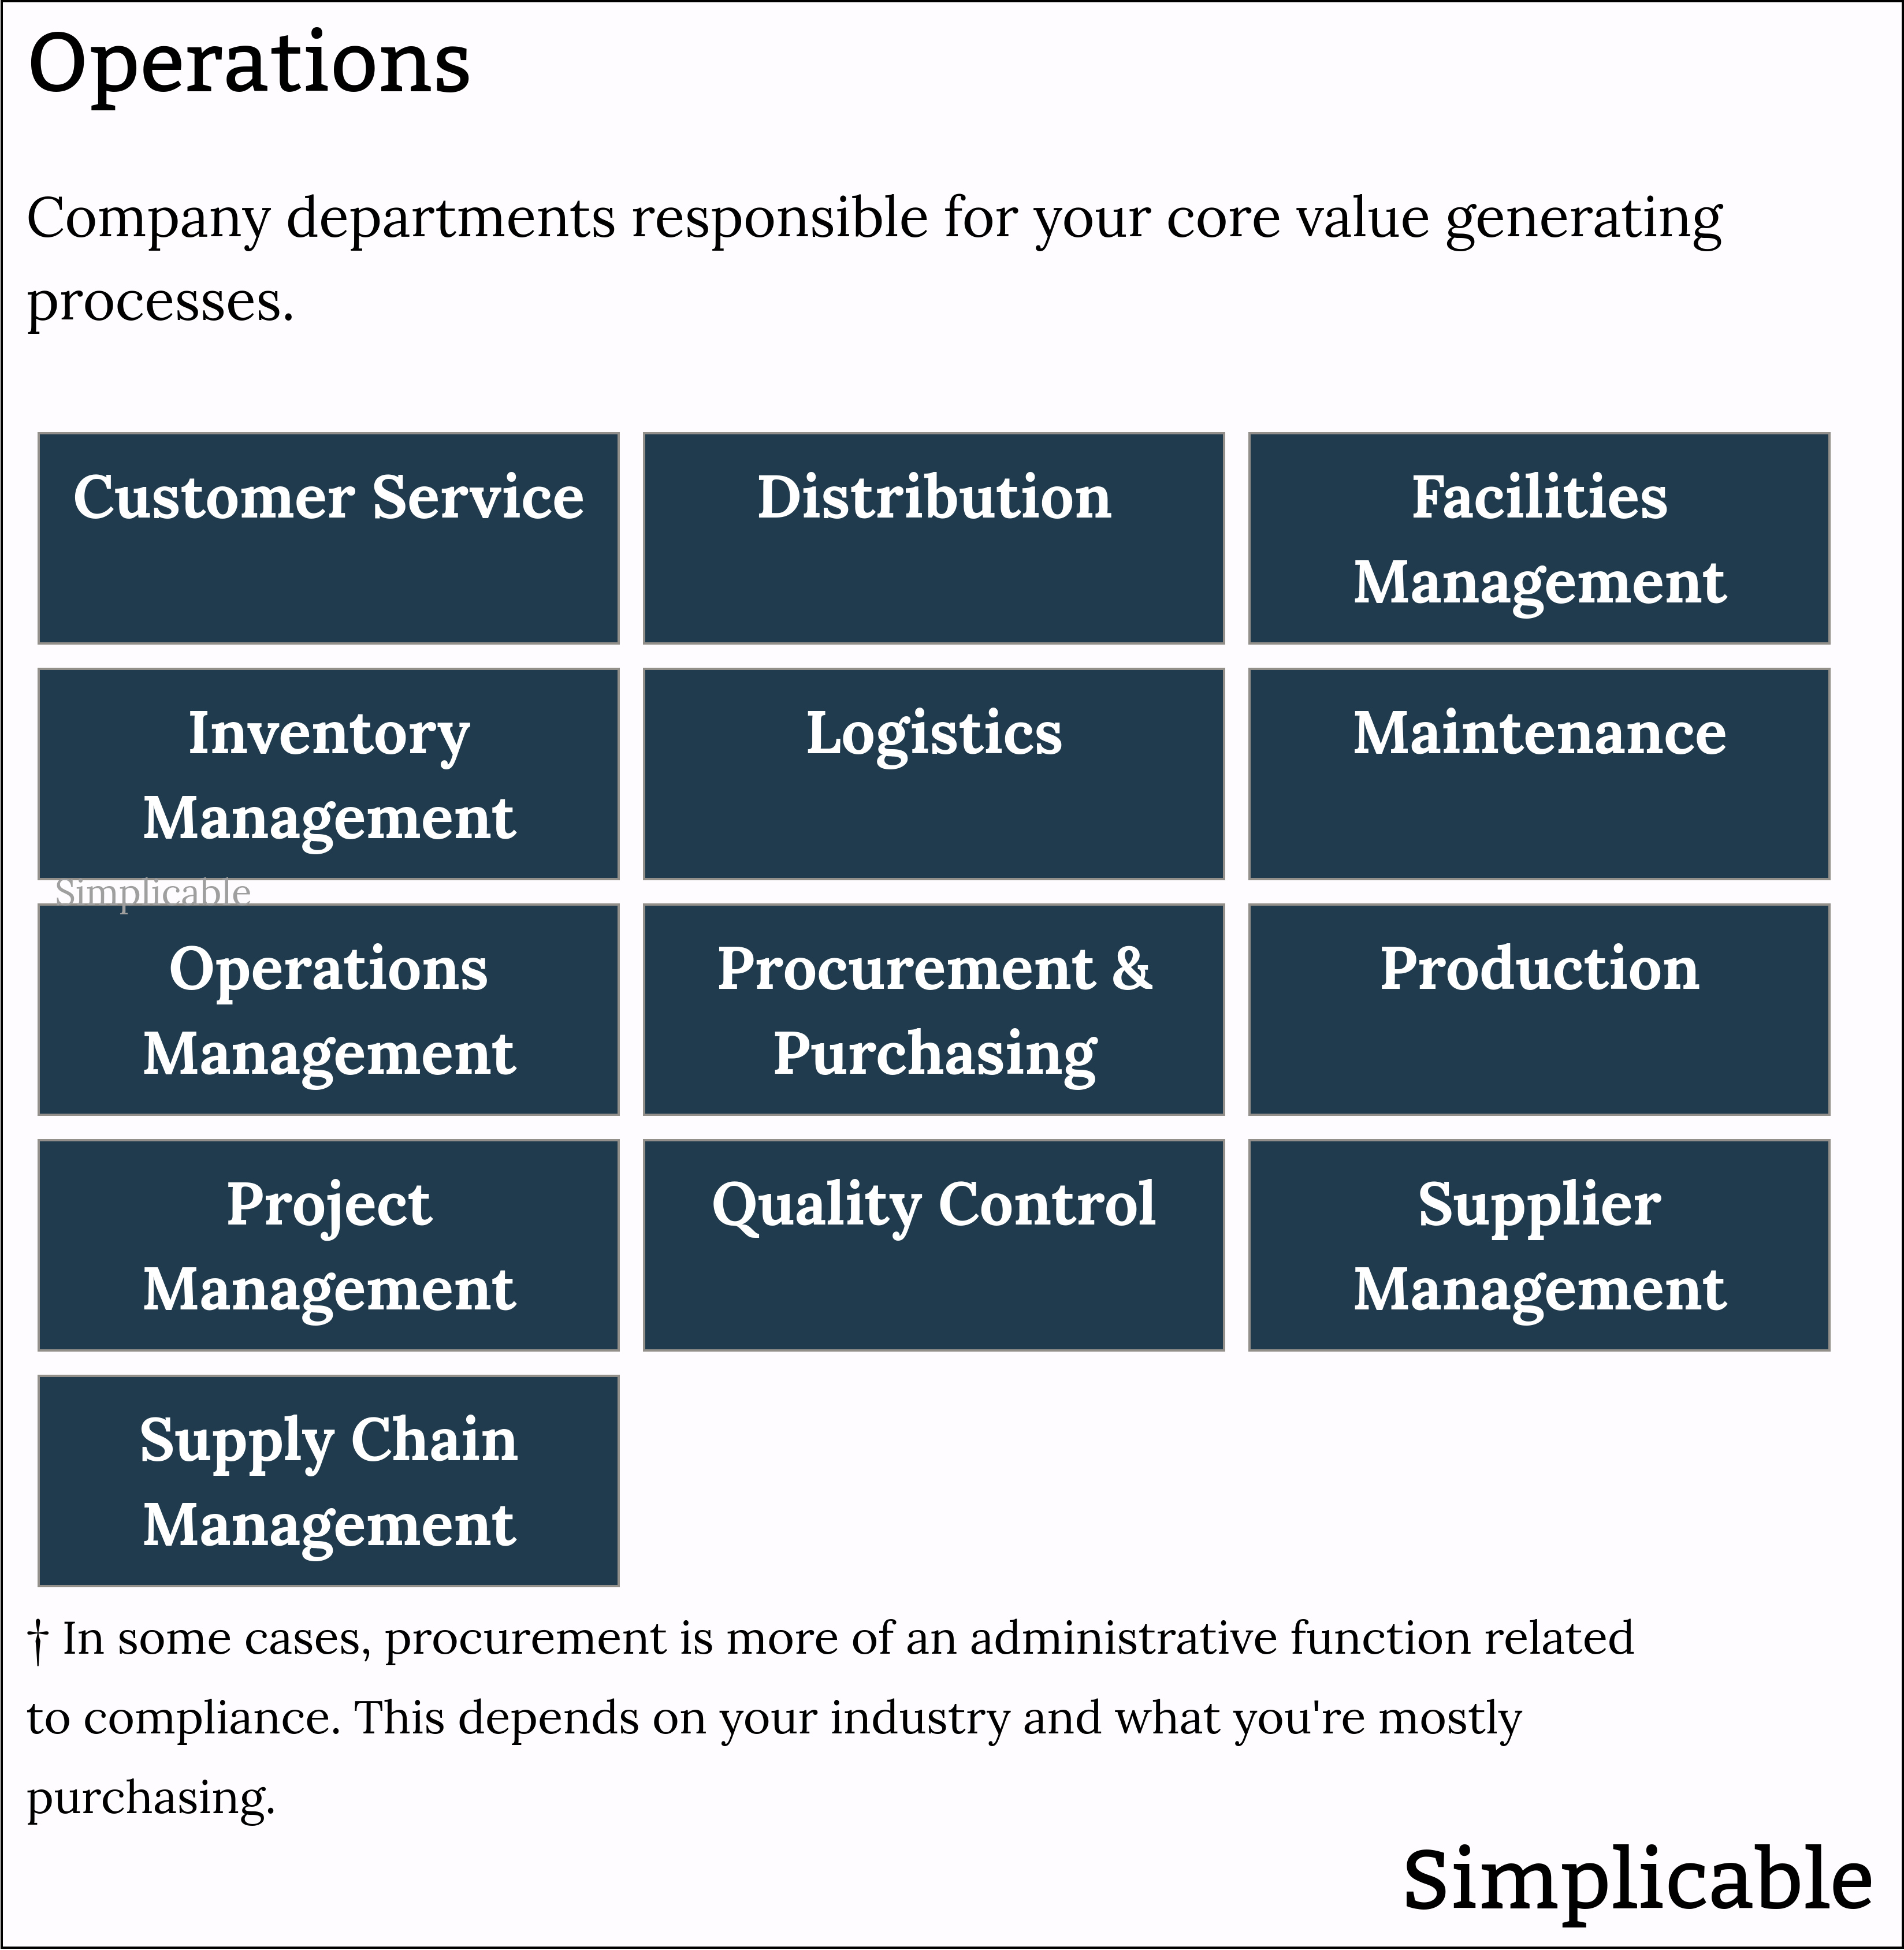 operations company departments